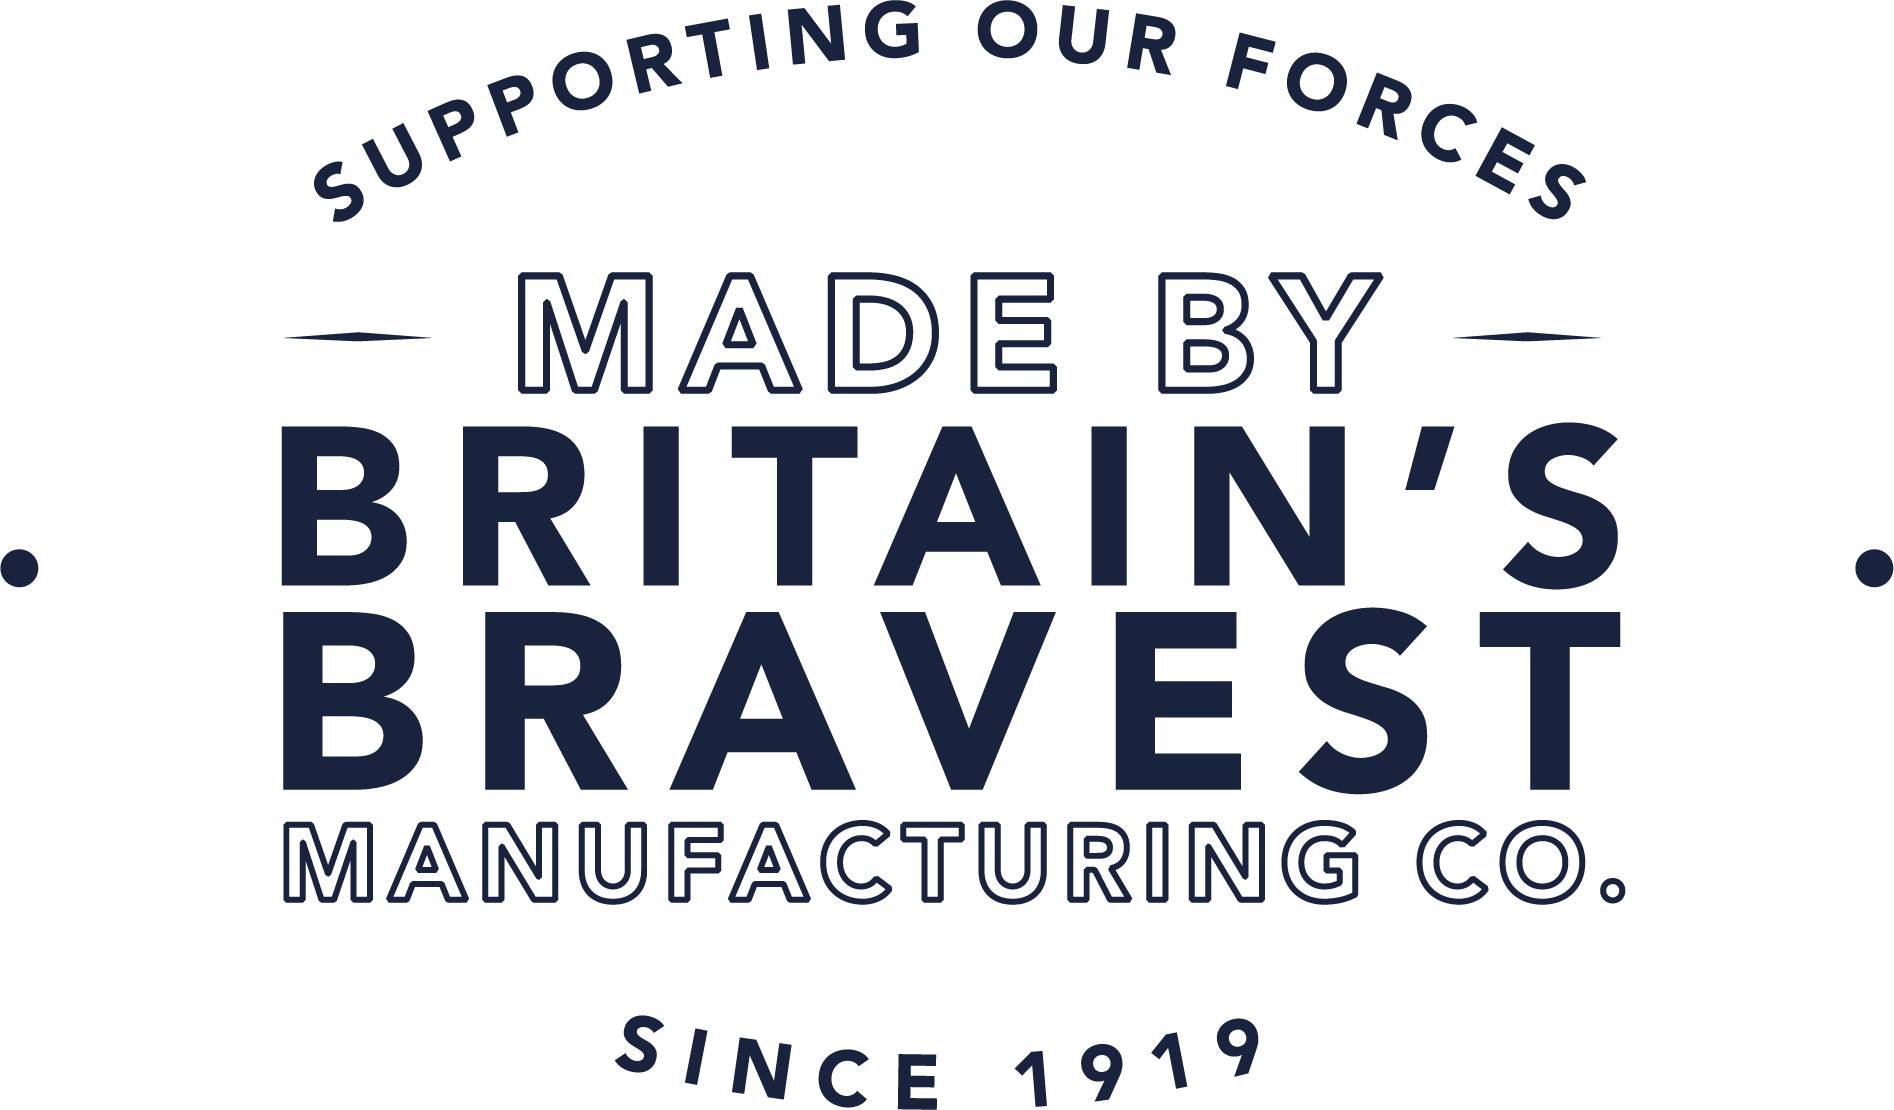 Supporting our forces Britains bravest 